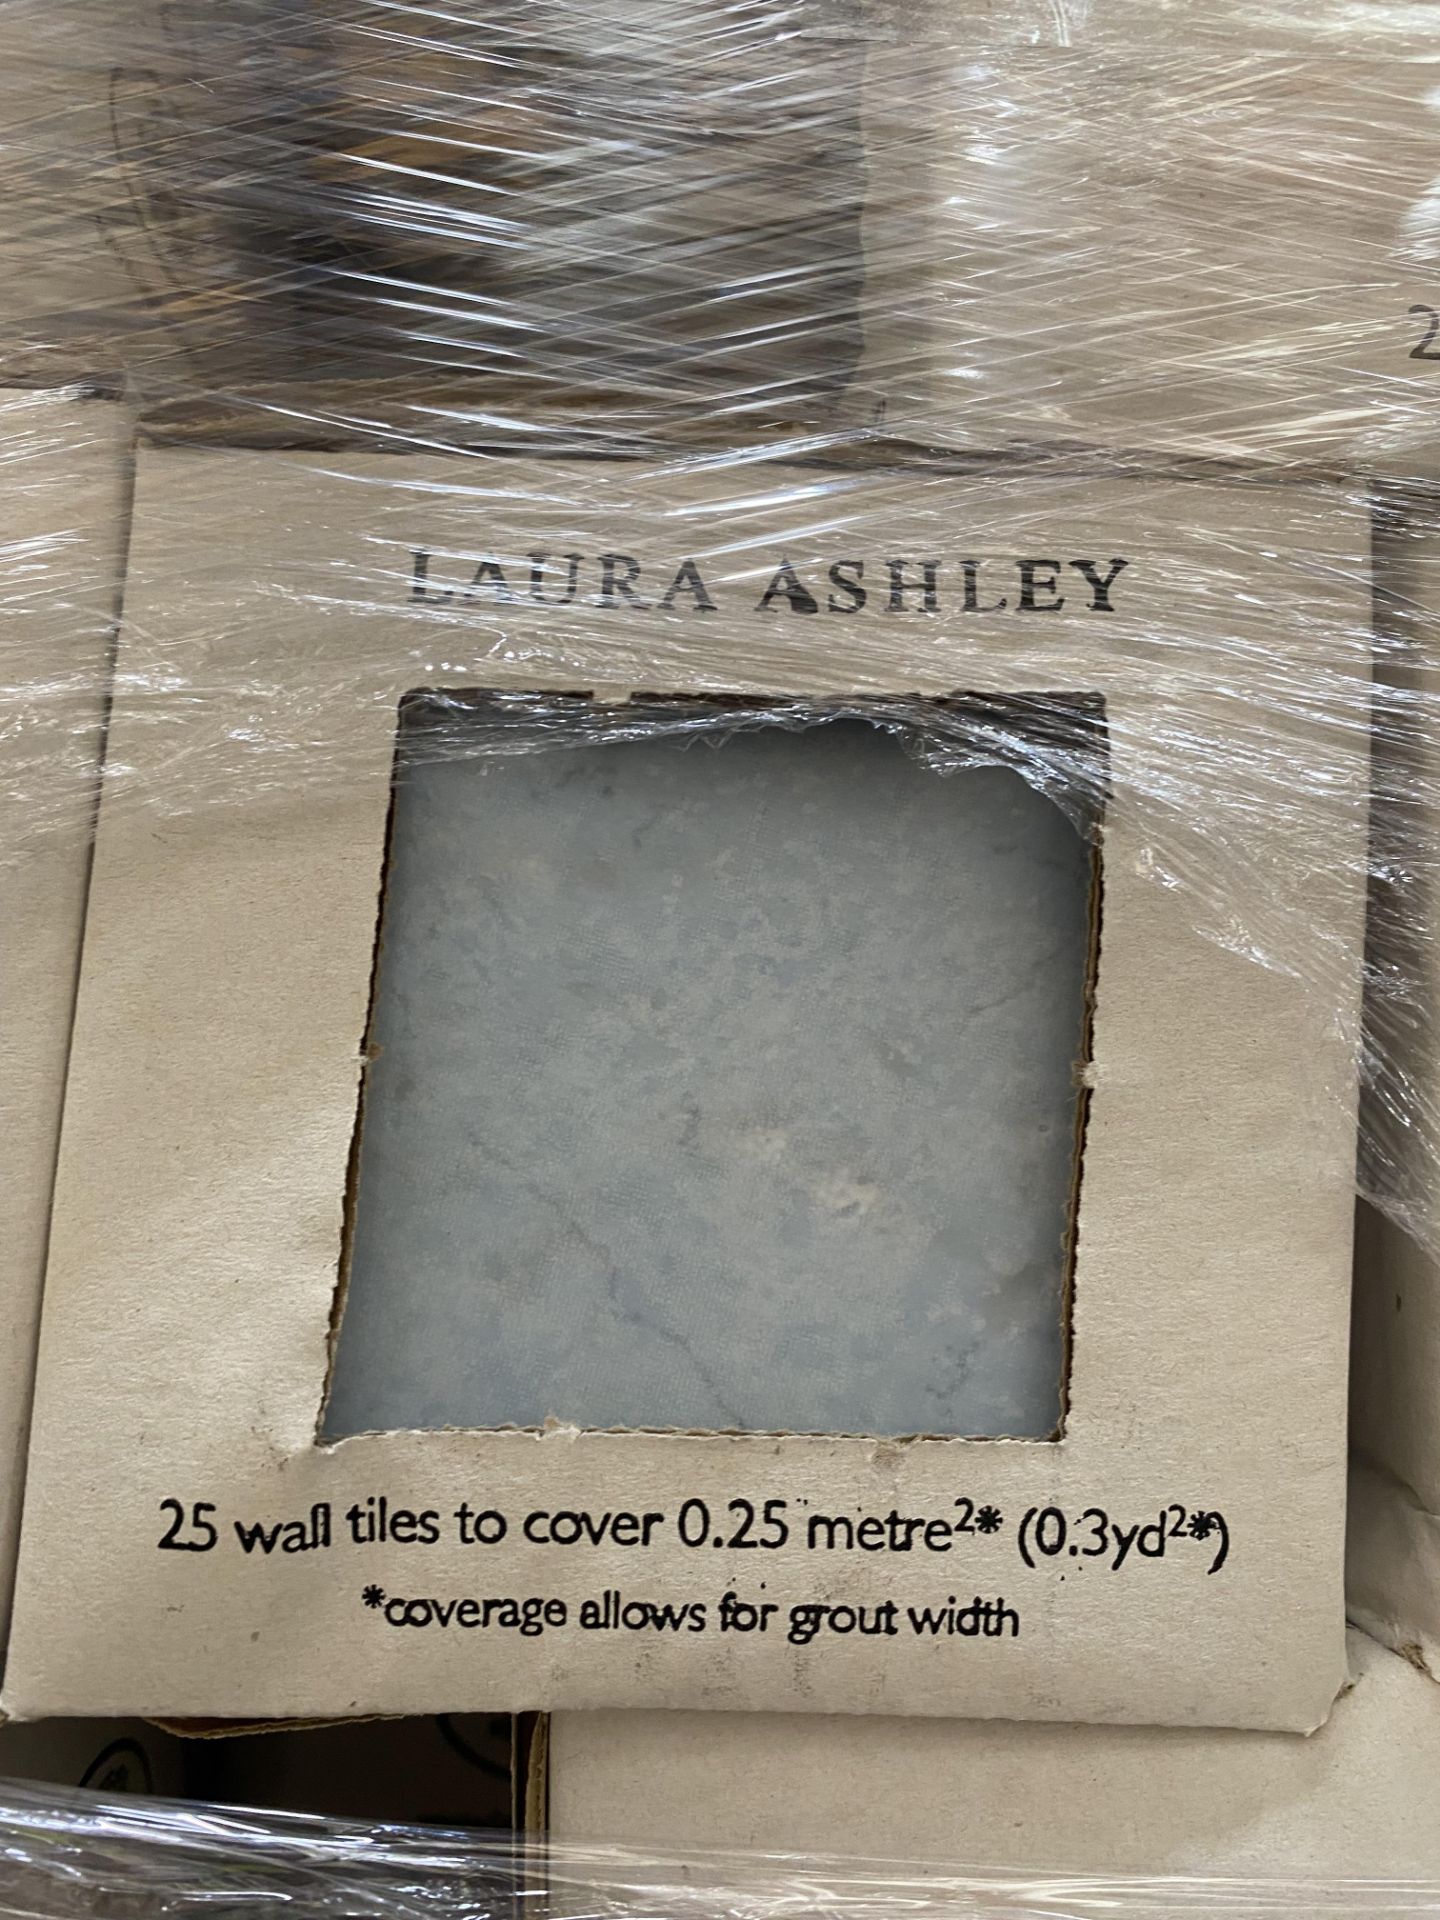 576 x Boxes Of Laura Ashley Chambray Wall Tiles, 98mm x 98mm ( 25 Tiles Per Box ) - Image 3 of 3